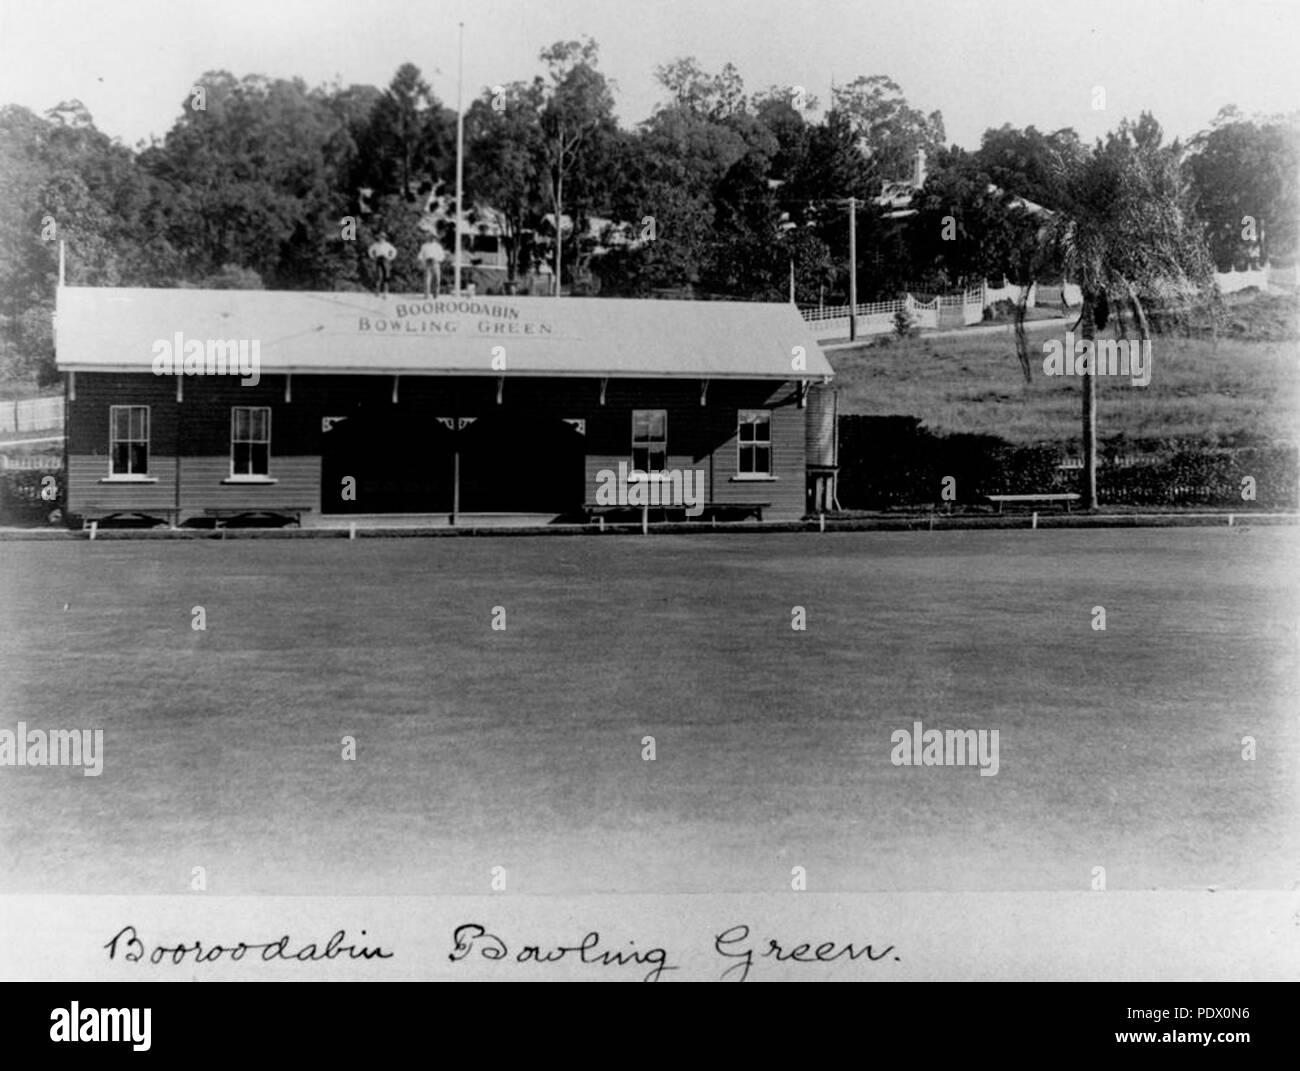 234 StateLibQld 1 157509 Clubhouse of the Booroodabin Bowling Green, Bowen Hills, Brisbane, 1907 Stock Photo